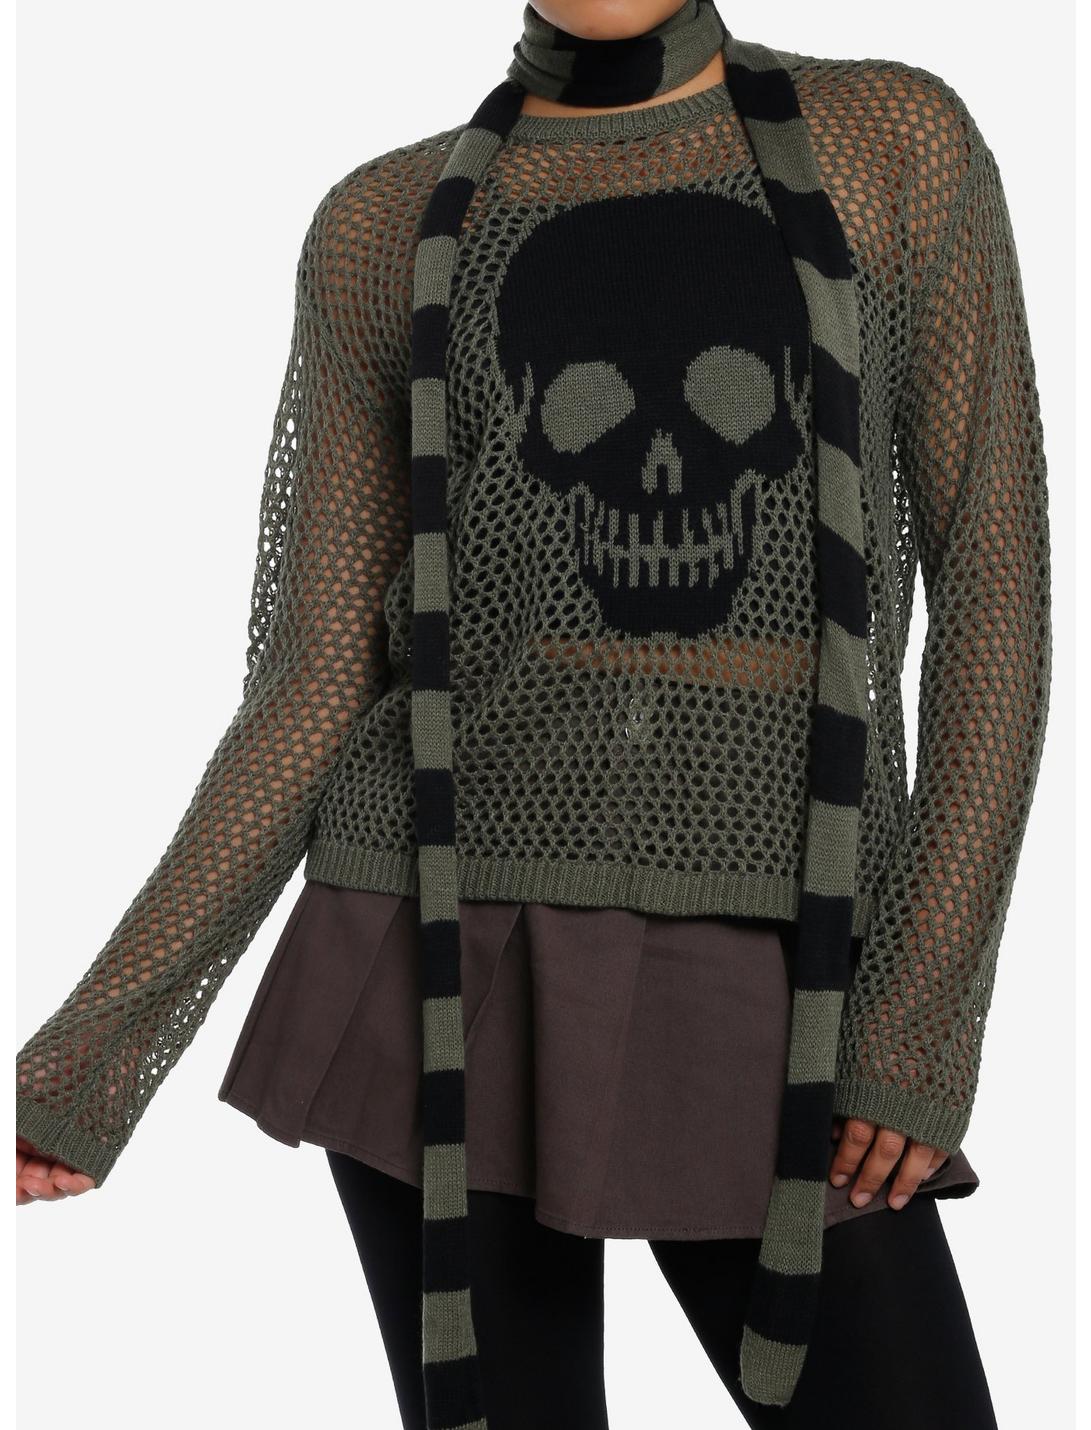 Social Collision Skull Girls Knit Sweater With Scarf, BLACK, hi-res